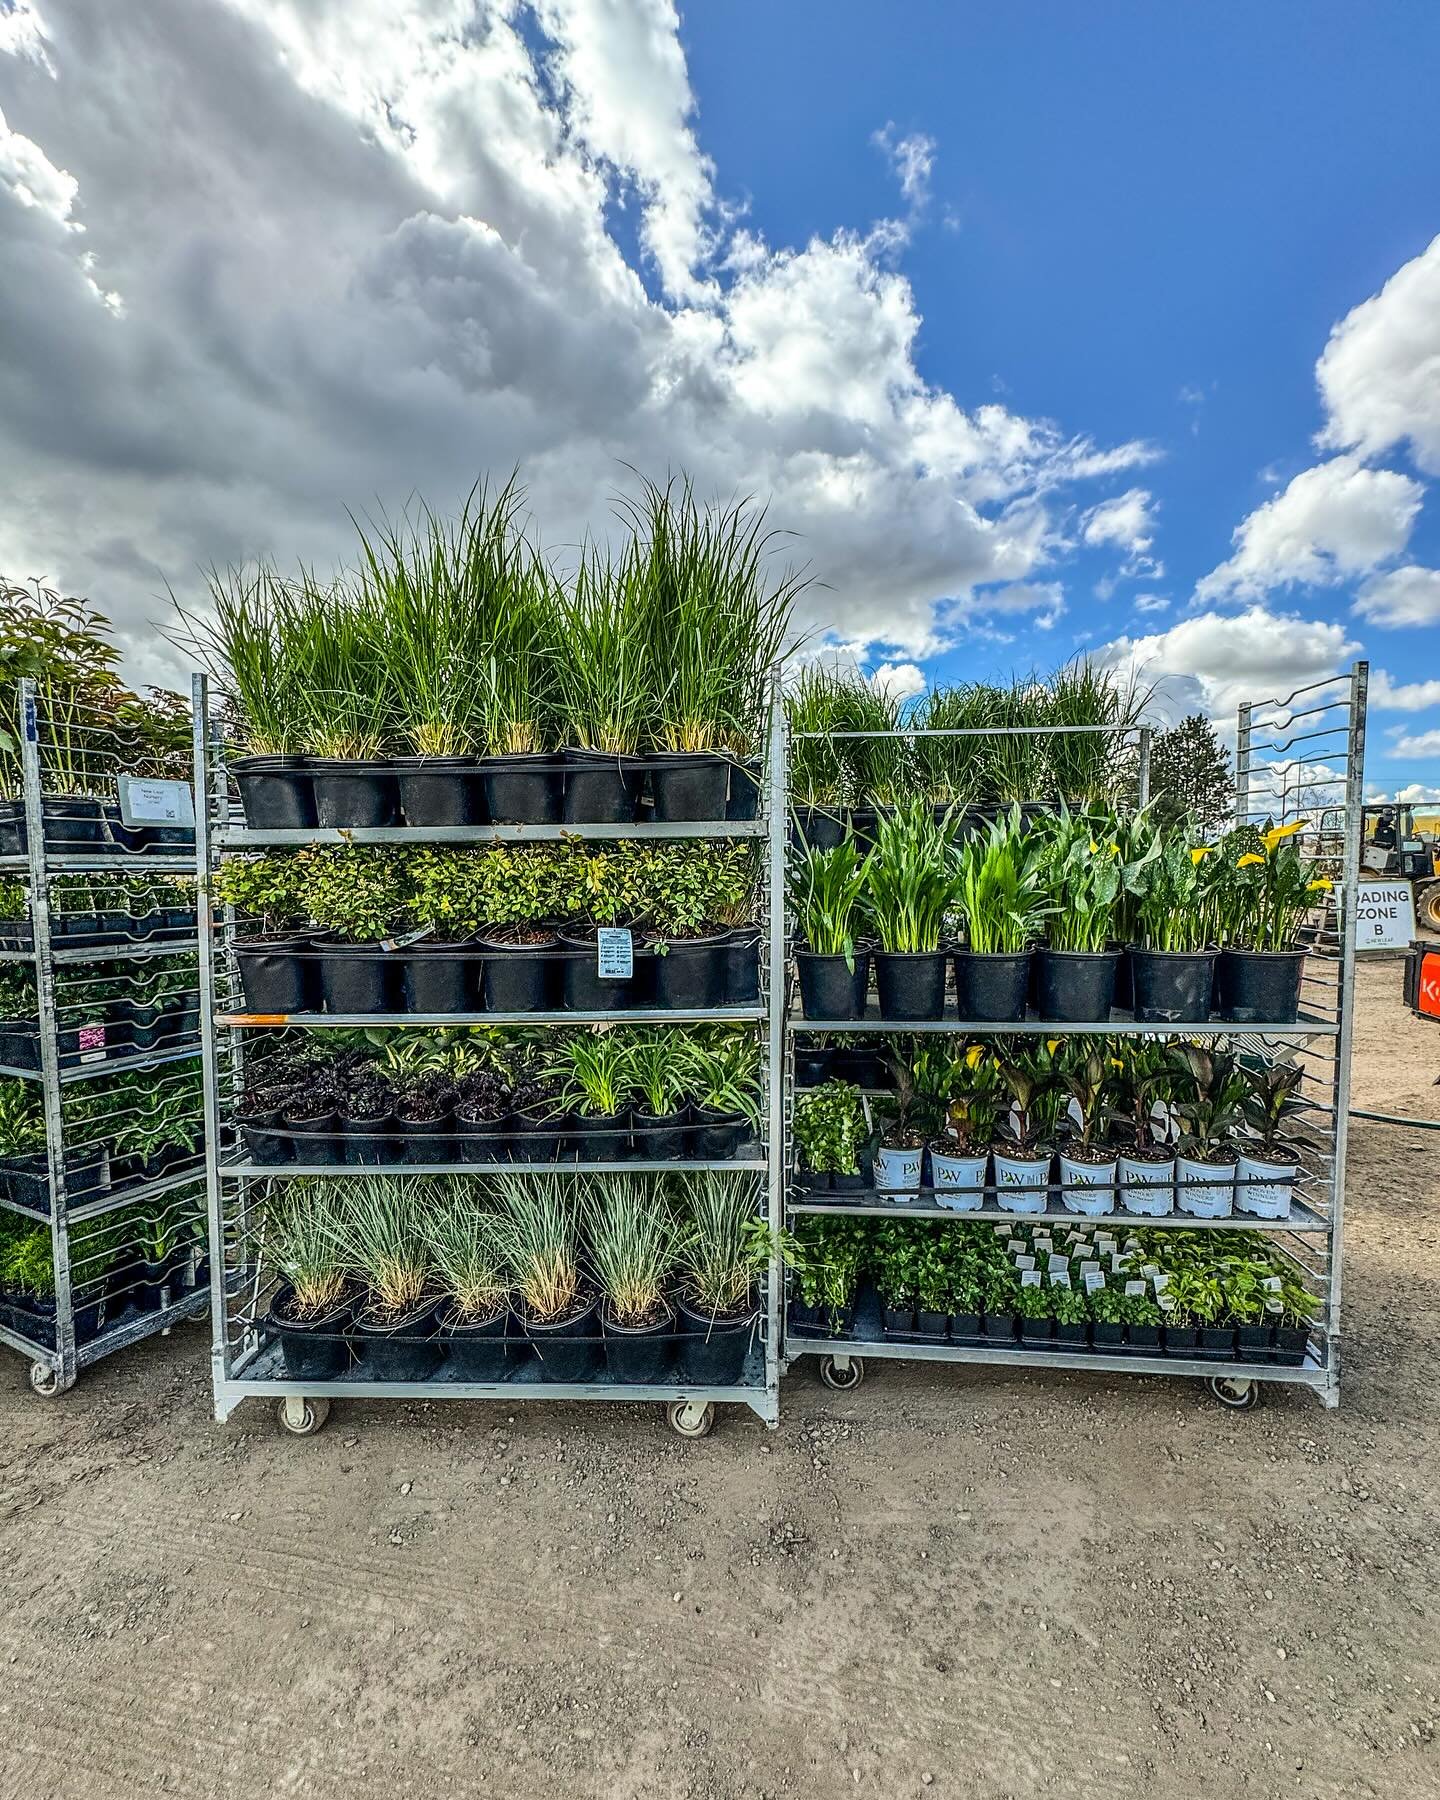 🌱 Fresh deliveries are the best deliveries!

We are receiving trucks nearly every day now, loaded with gorgeous flowers and plants. Come on in to see what&rsquo;s new at the nursery!